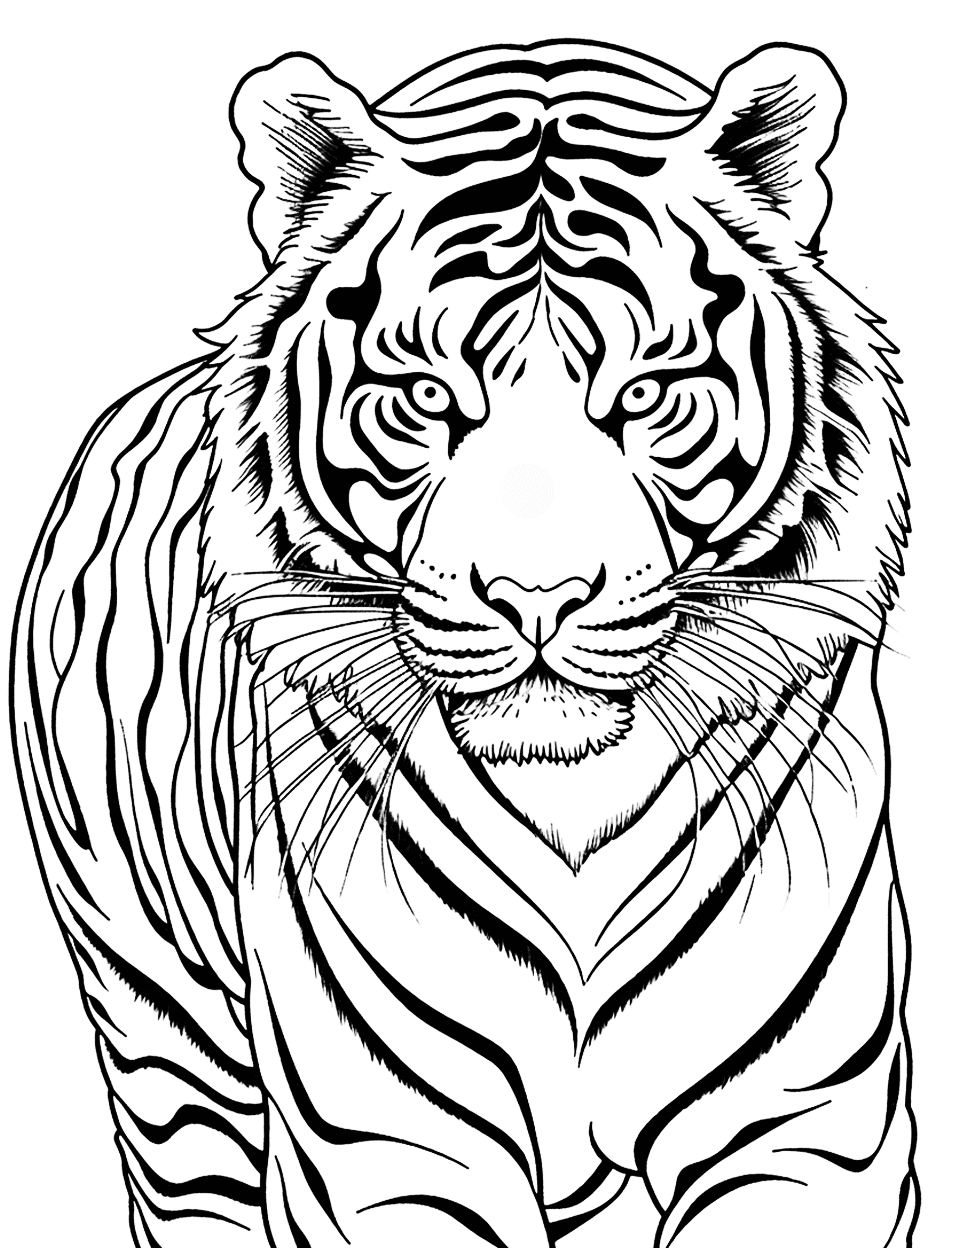 Detailed Siberian Tiger Coloring Page - A meticulous portrayal of a Siberian tiger, highlighting its stripes and features.